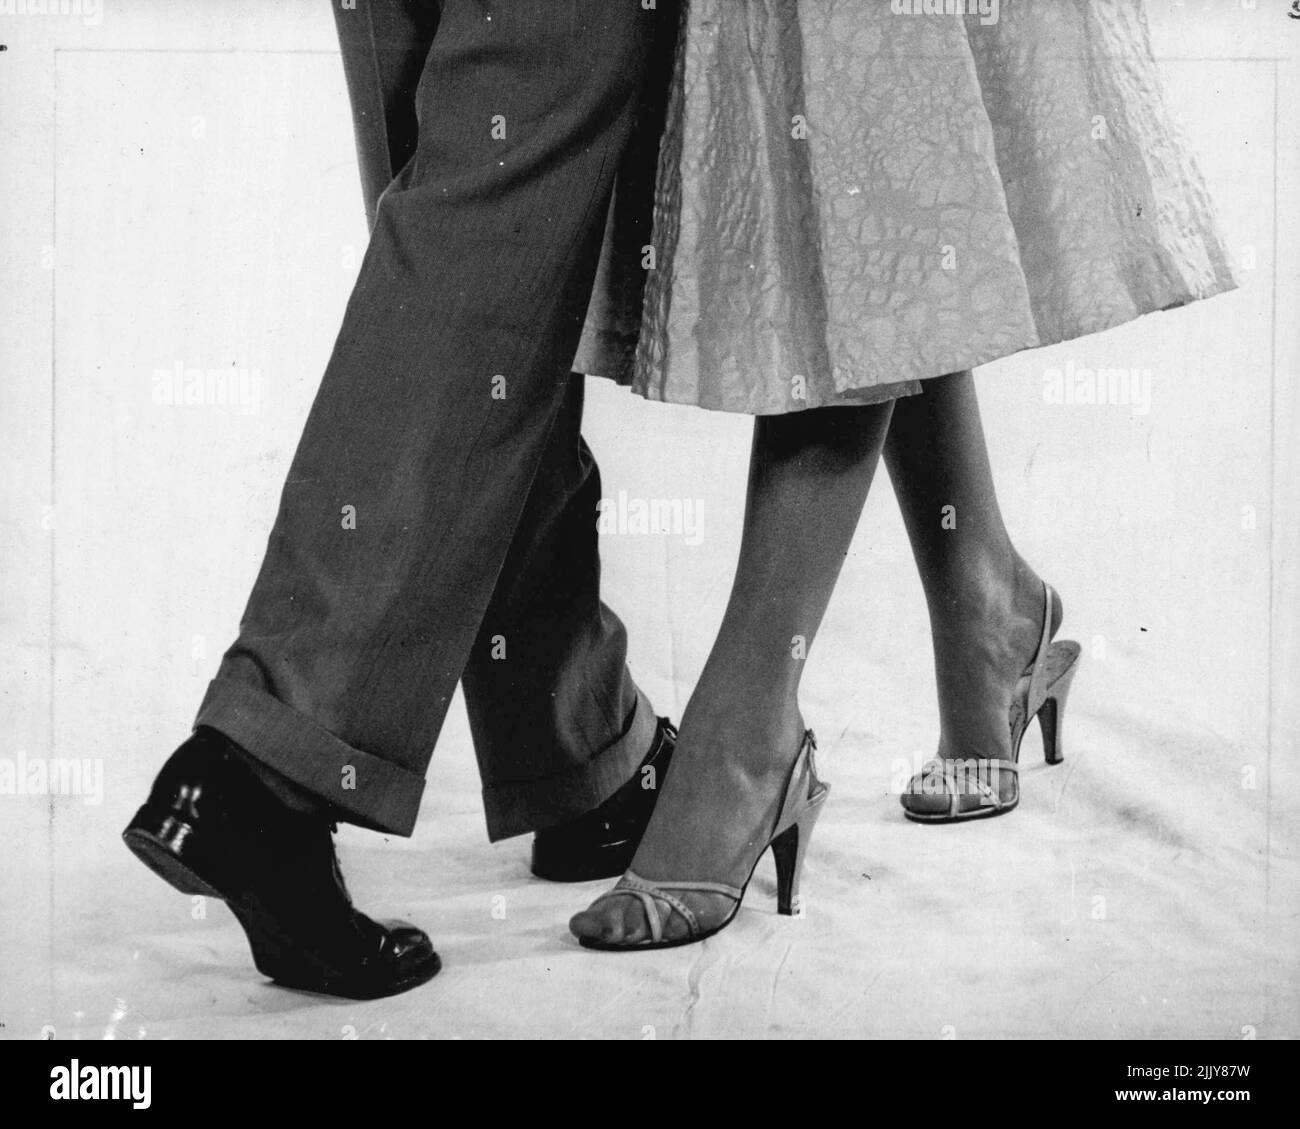 Step Five (slow): Turning to the left now, the man moves his right foot back. The girl moves her left foot forward, turning to the left. March 14, 1955. Stock Photo